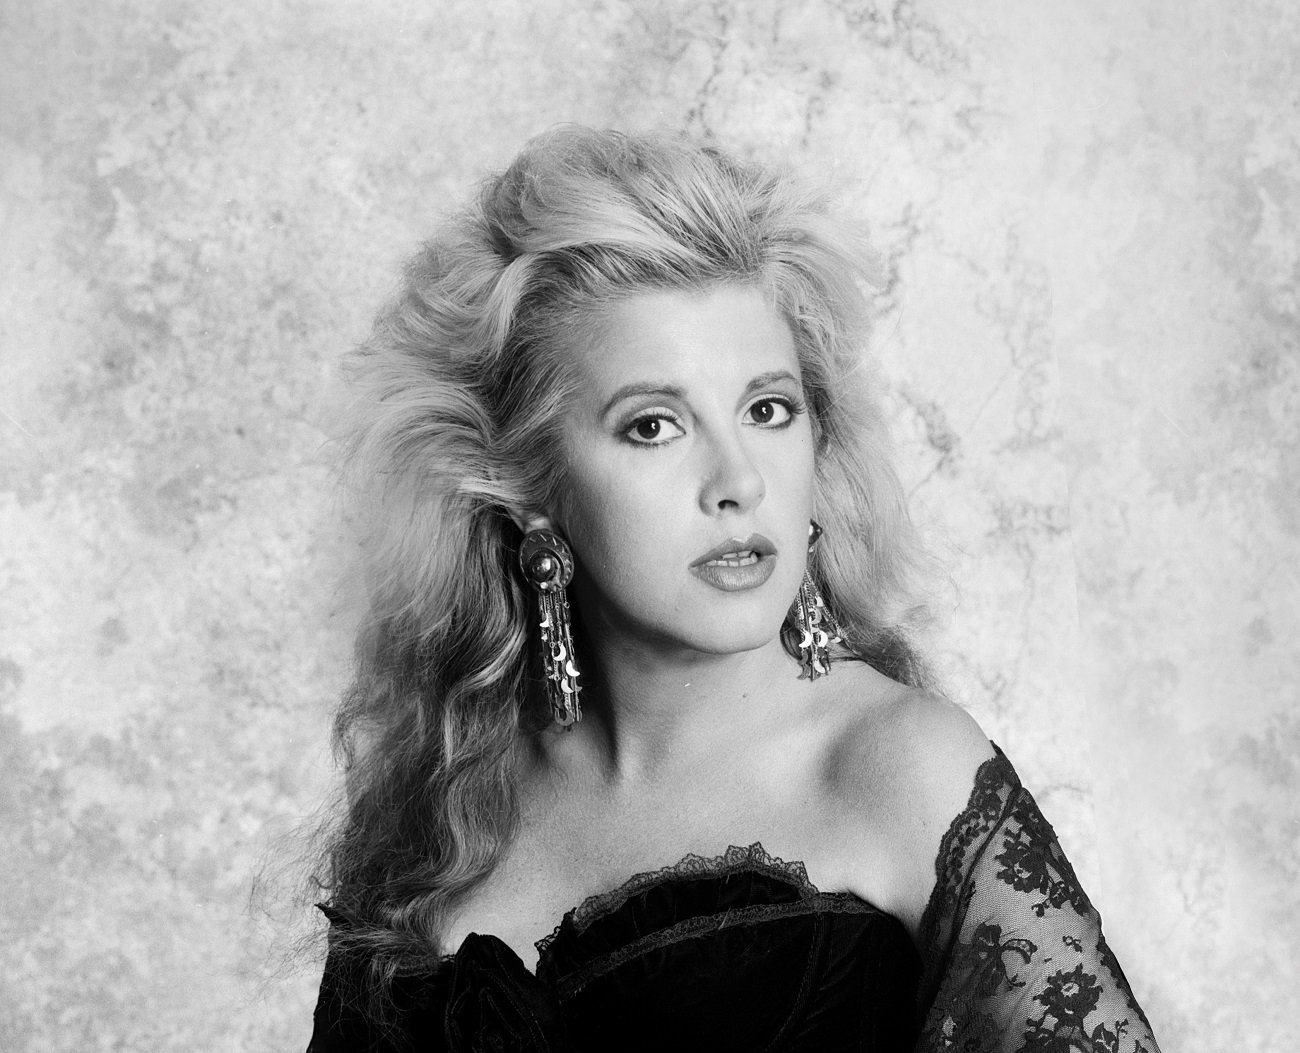 A black and white photo of Stevie Nicks wearing a black lace dress against a gray background.